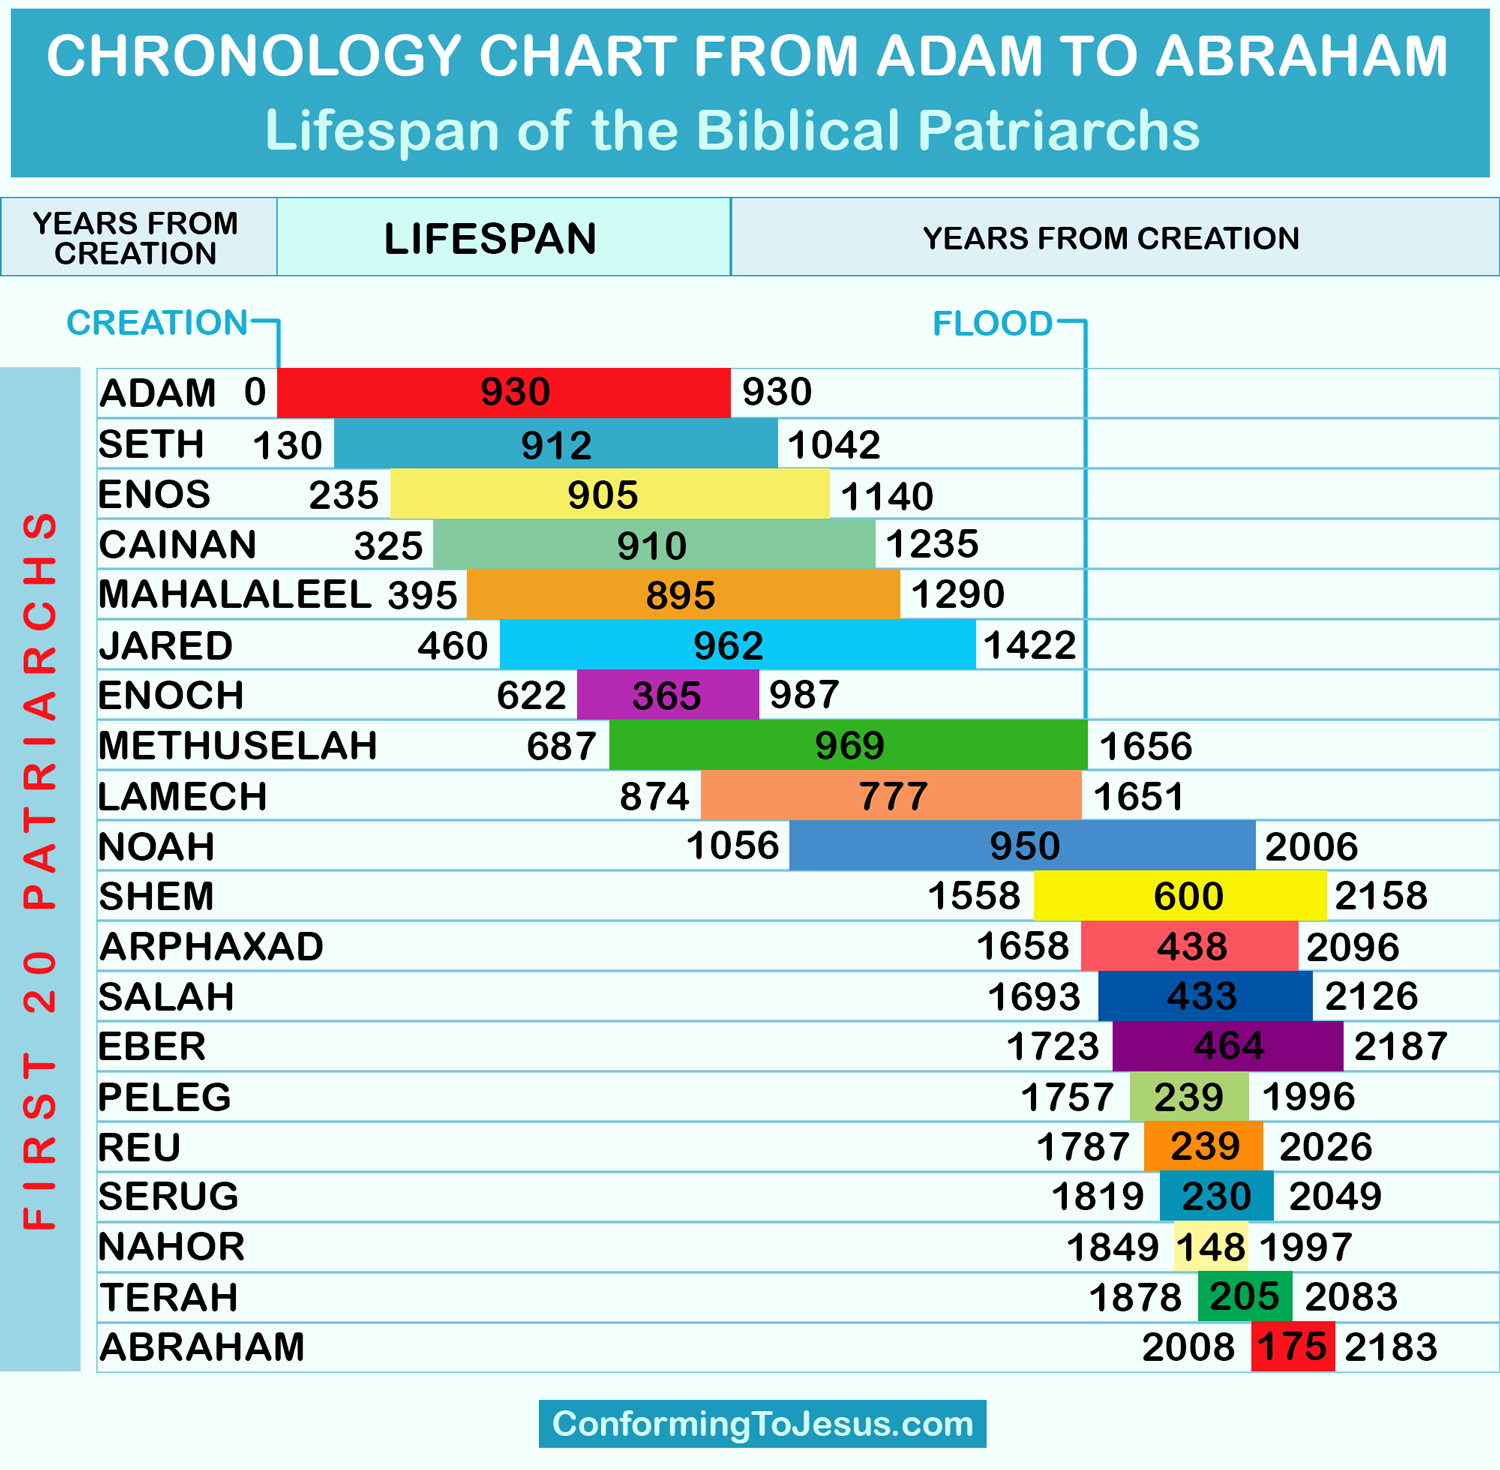 Chronology Chart from Adam to Abraham